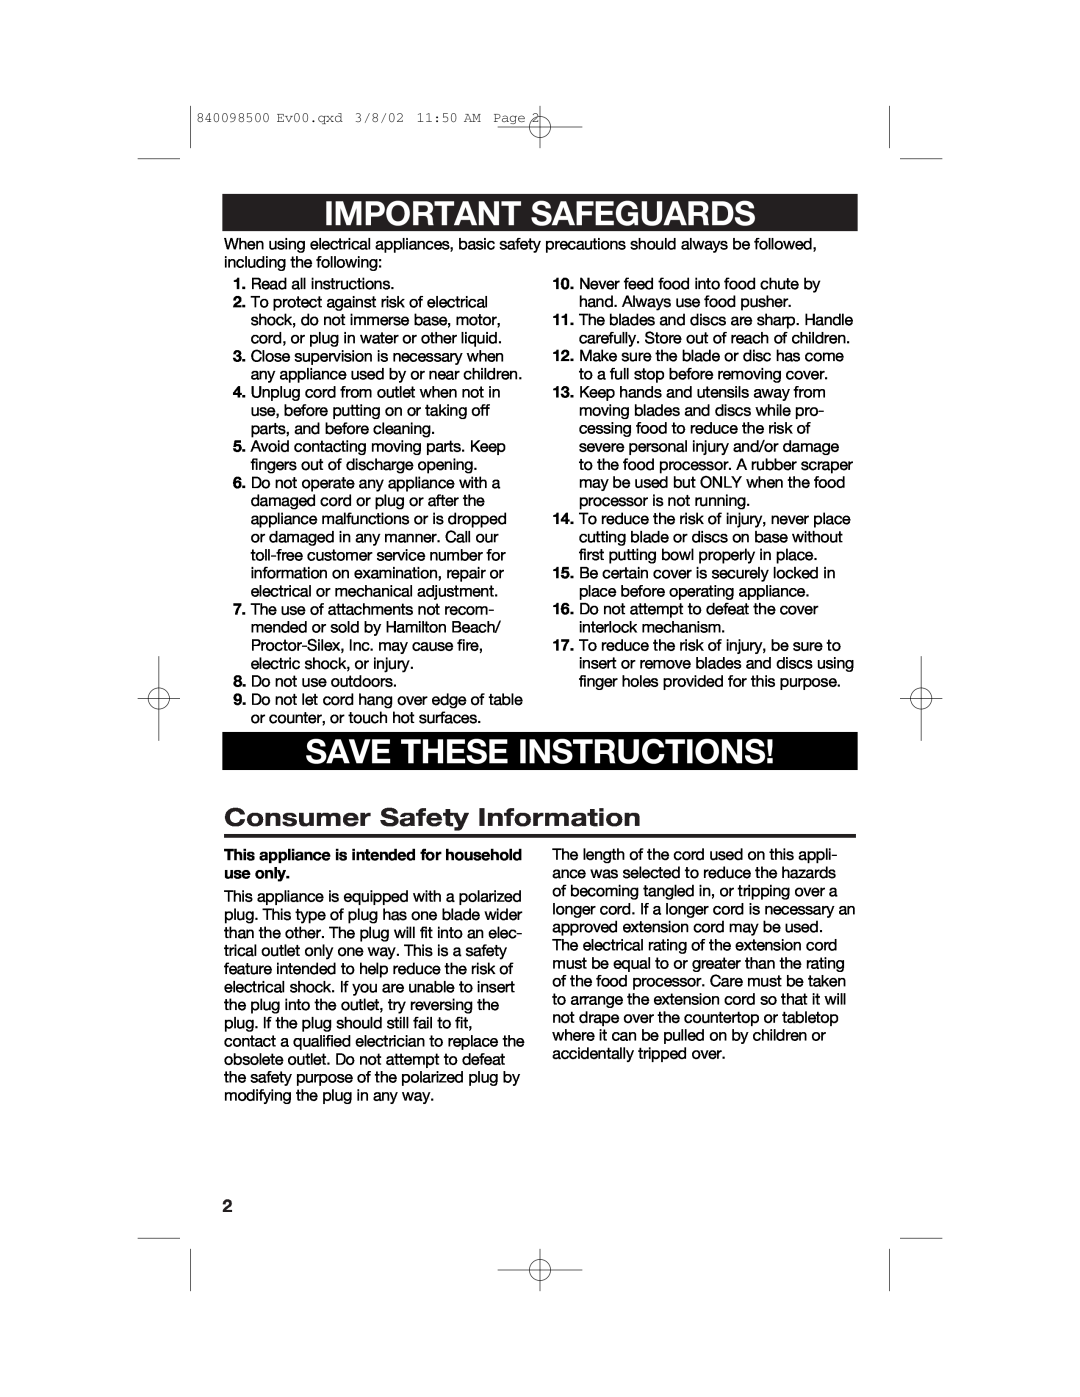 Hamilton Beach 70200 manual Important Safeguards, Save These Instructions, Consumer Safety Information 